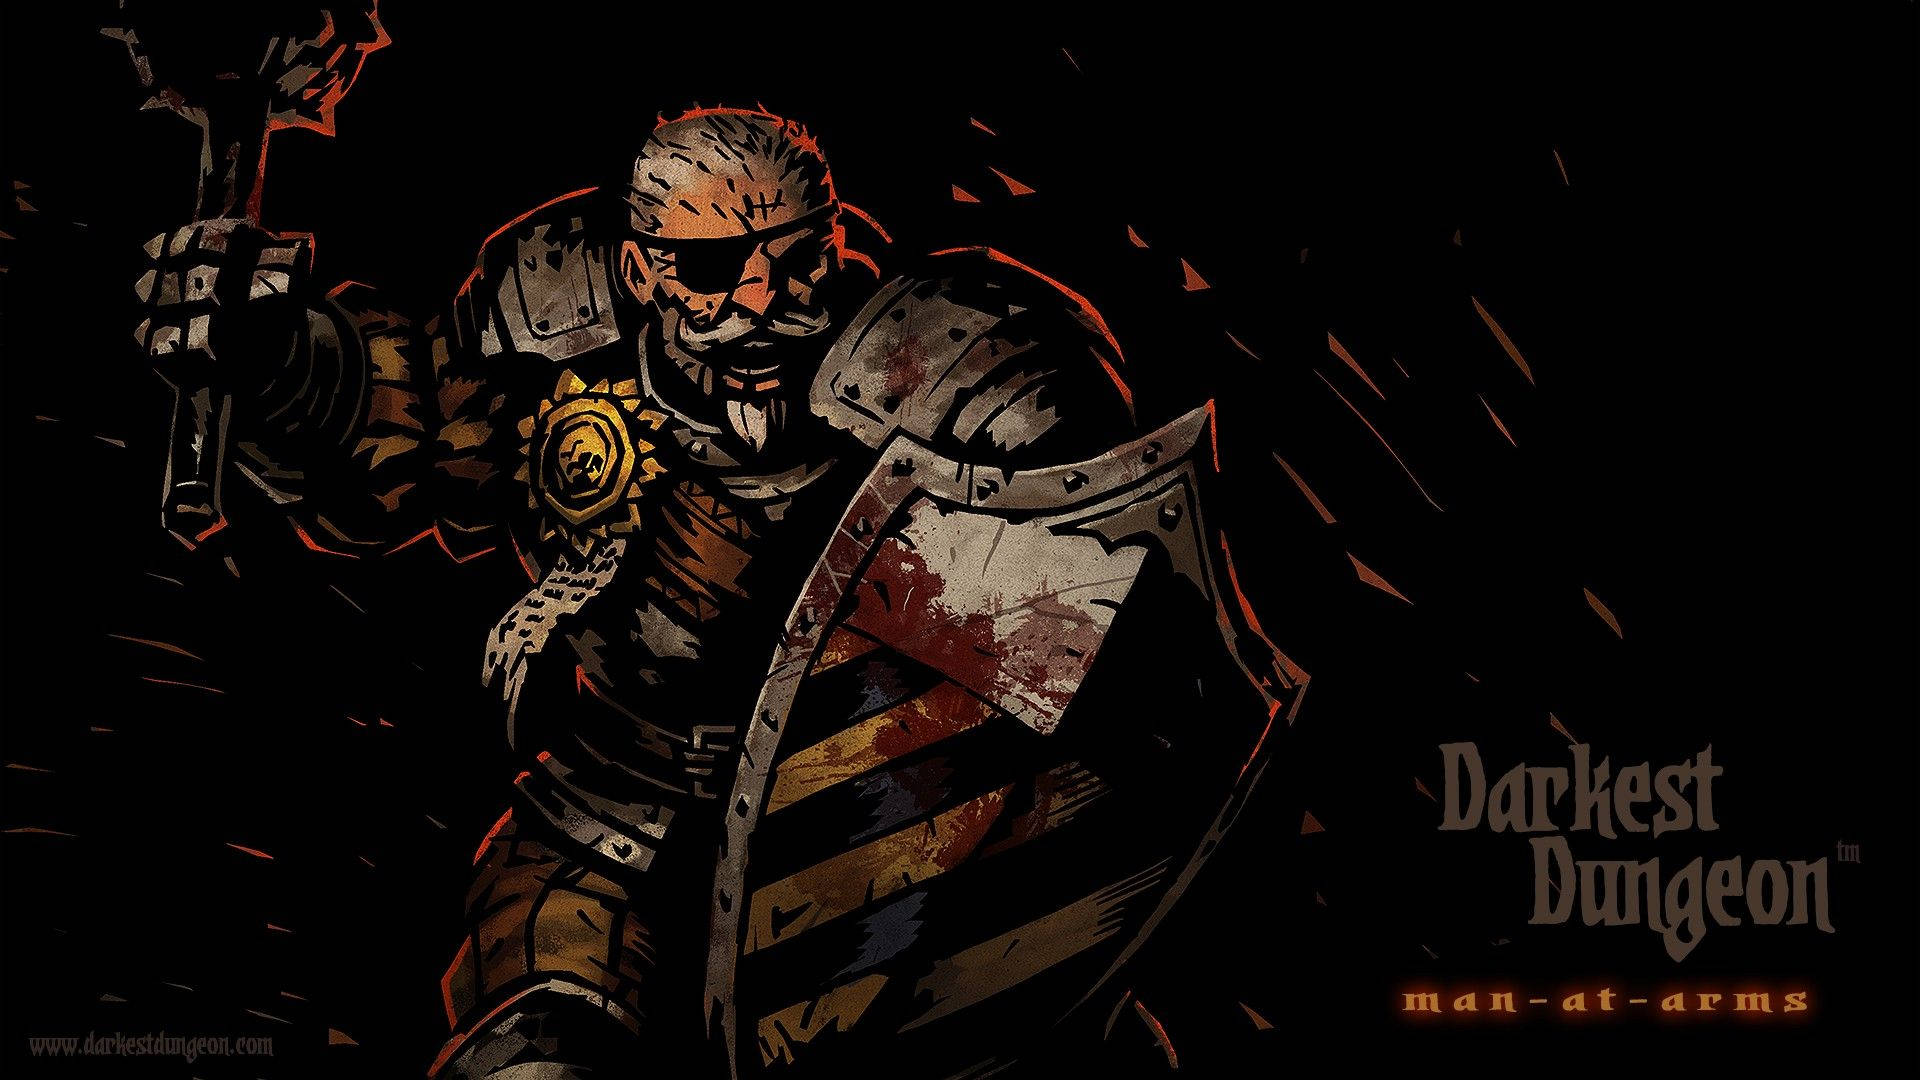 A Man-at-Arms ventures into the Darkest Dungeon Wallpaper